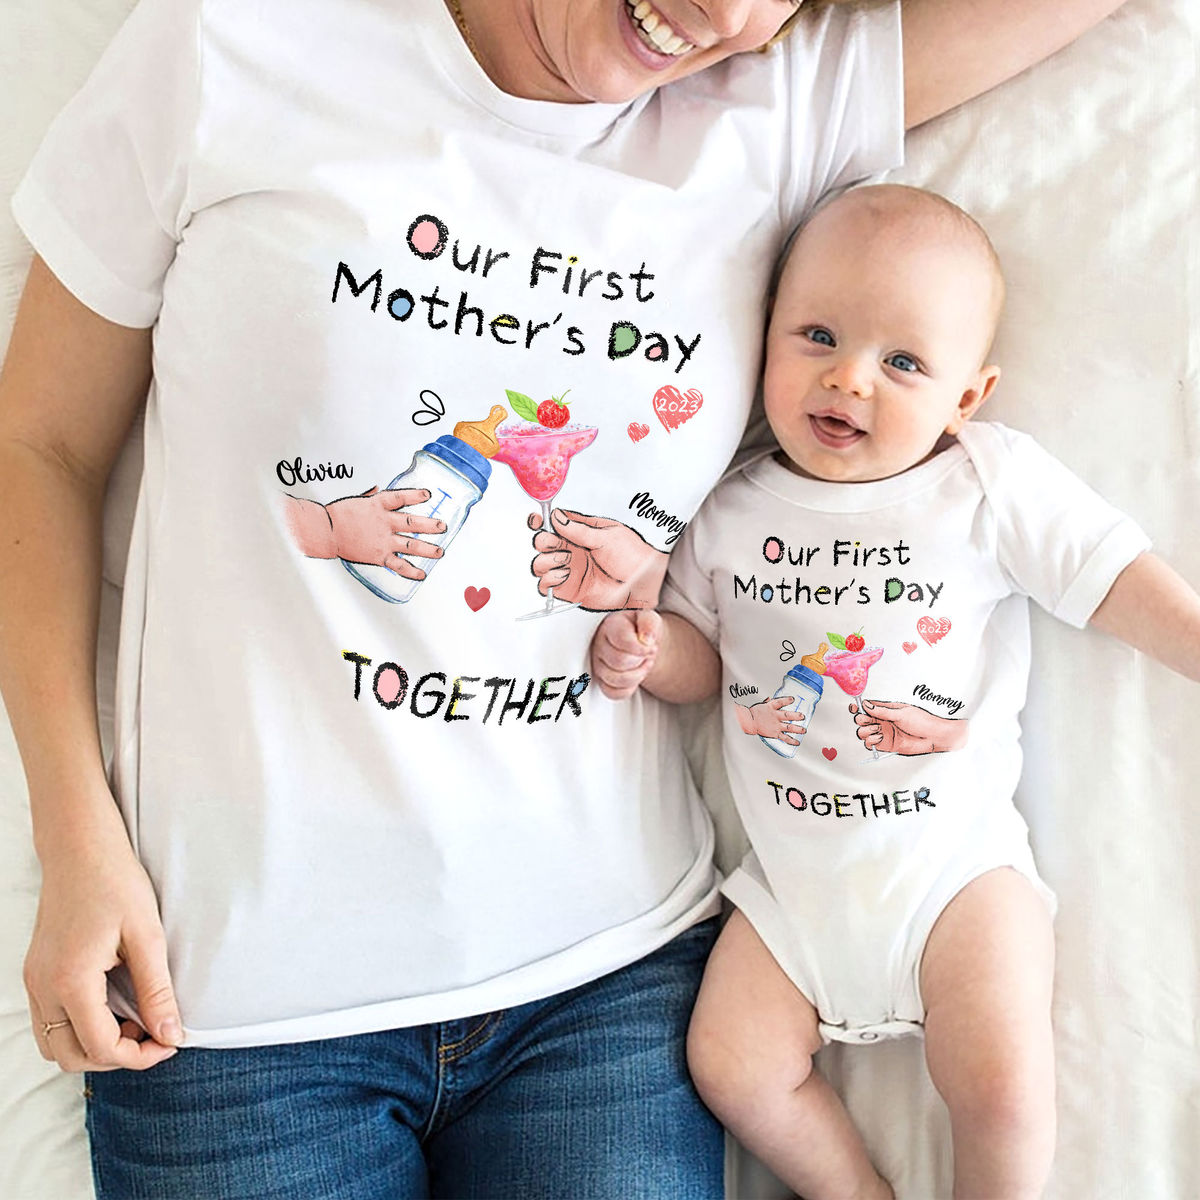 First Mother's Day - Our First Mother's Day Matching Outfit (Onesie and TShirt Set) - Wine n Milk